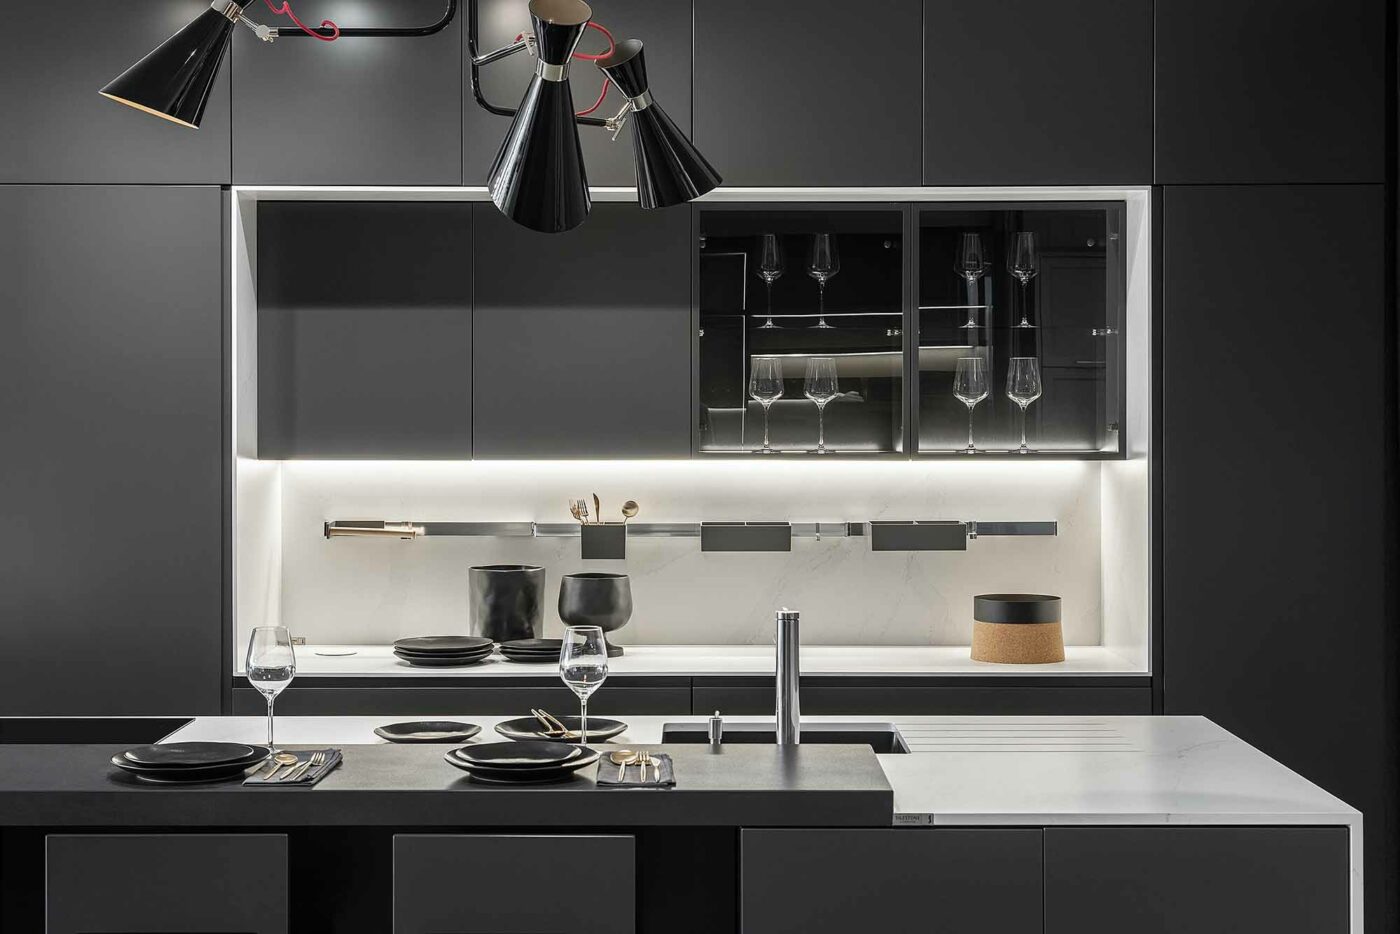 Image of var www html tools.cosentino.com global ws public pending approval 20190604 FABRI SHOWROOM 019 in Discover the most popular black kitchens - Cosentino